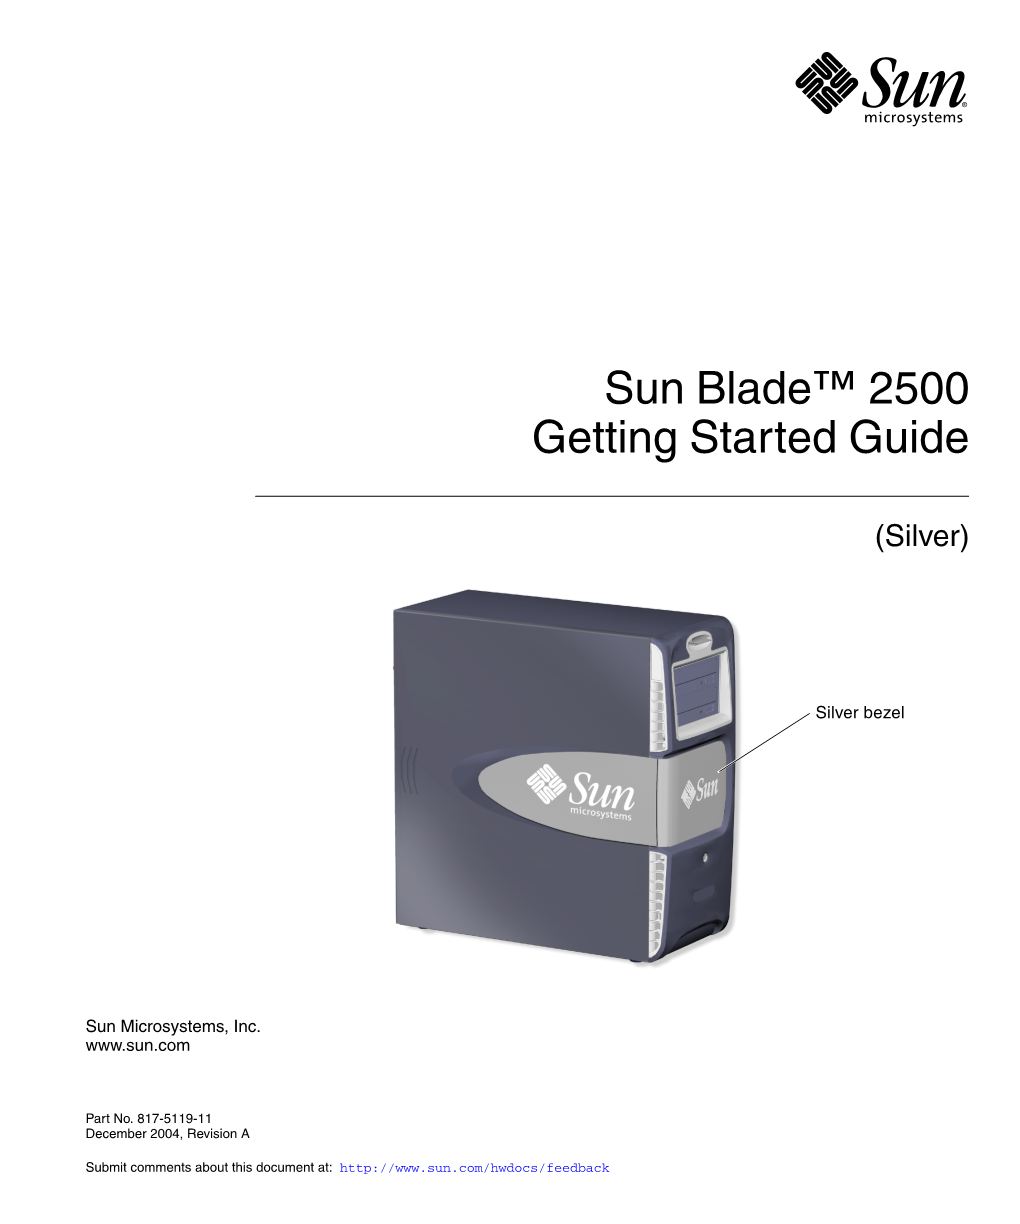 Sun Blade 2500 Getting Started Guide (Silver)